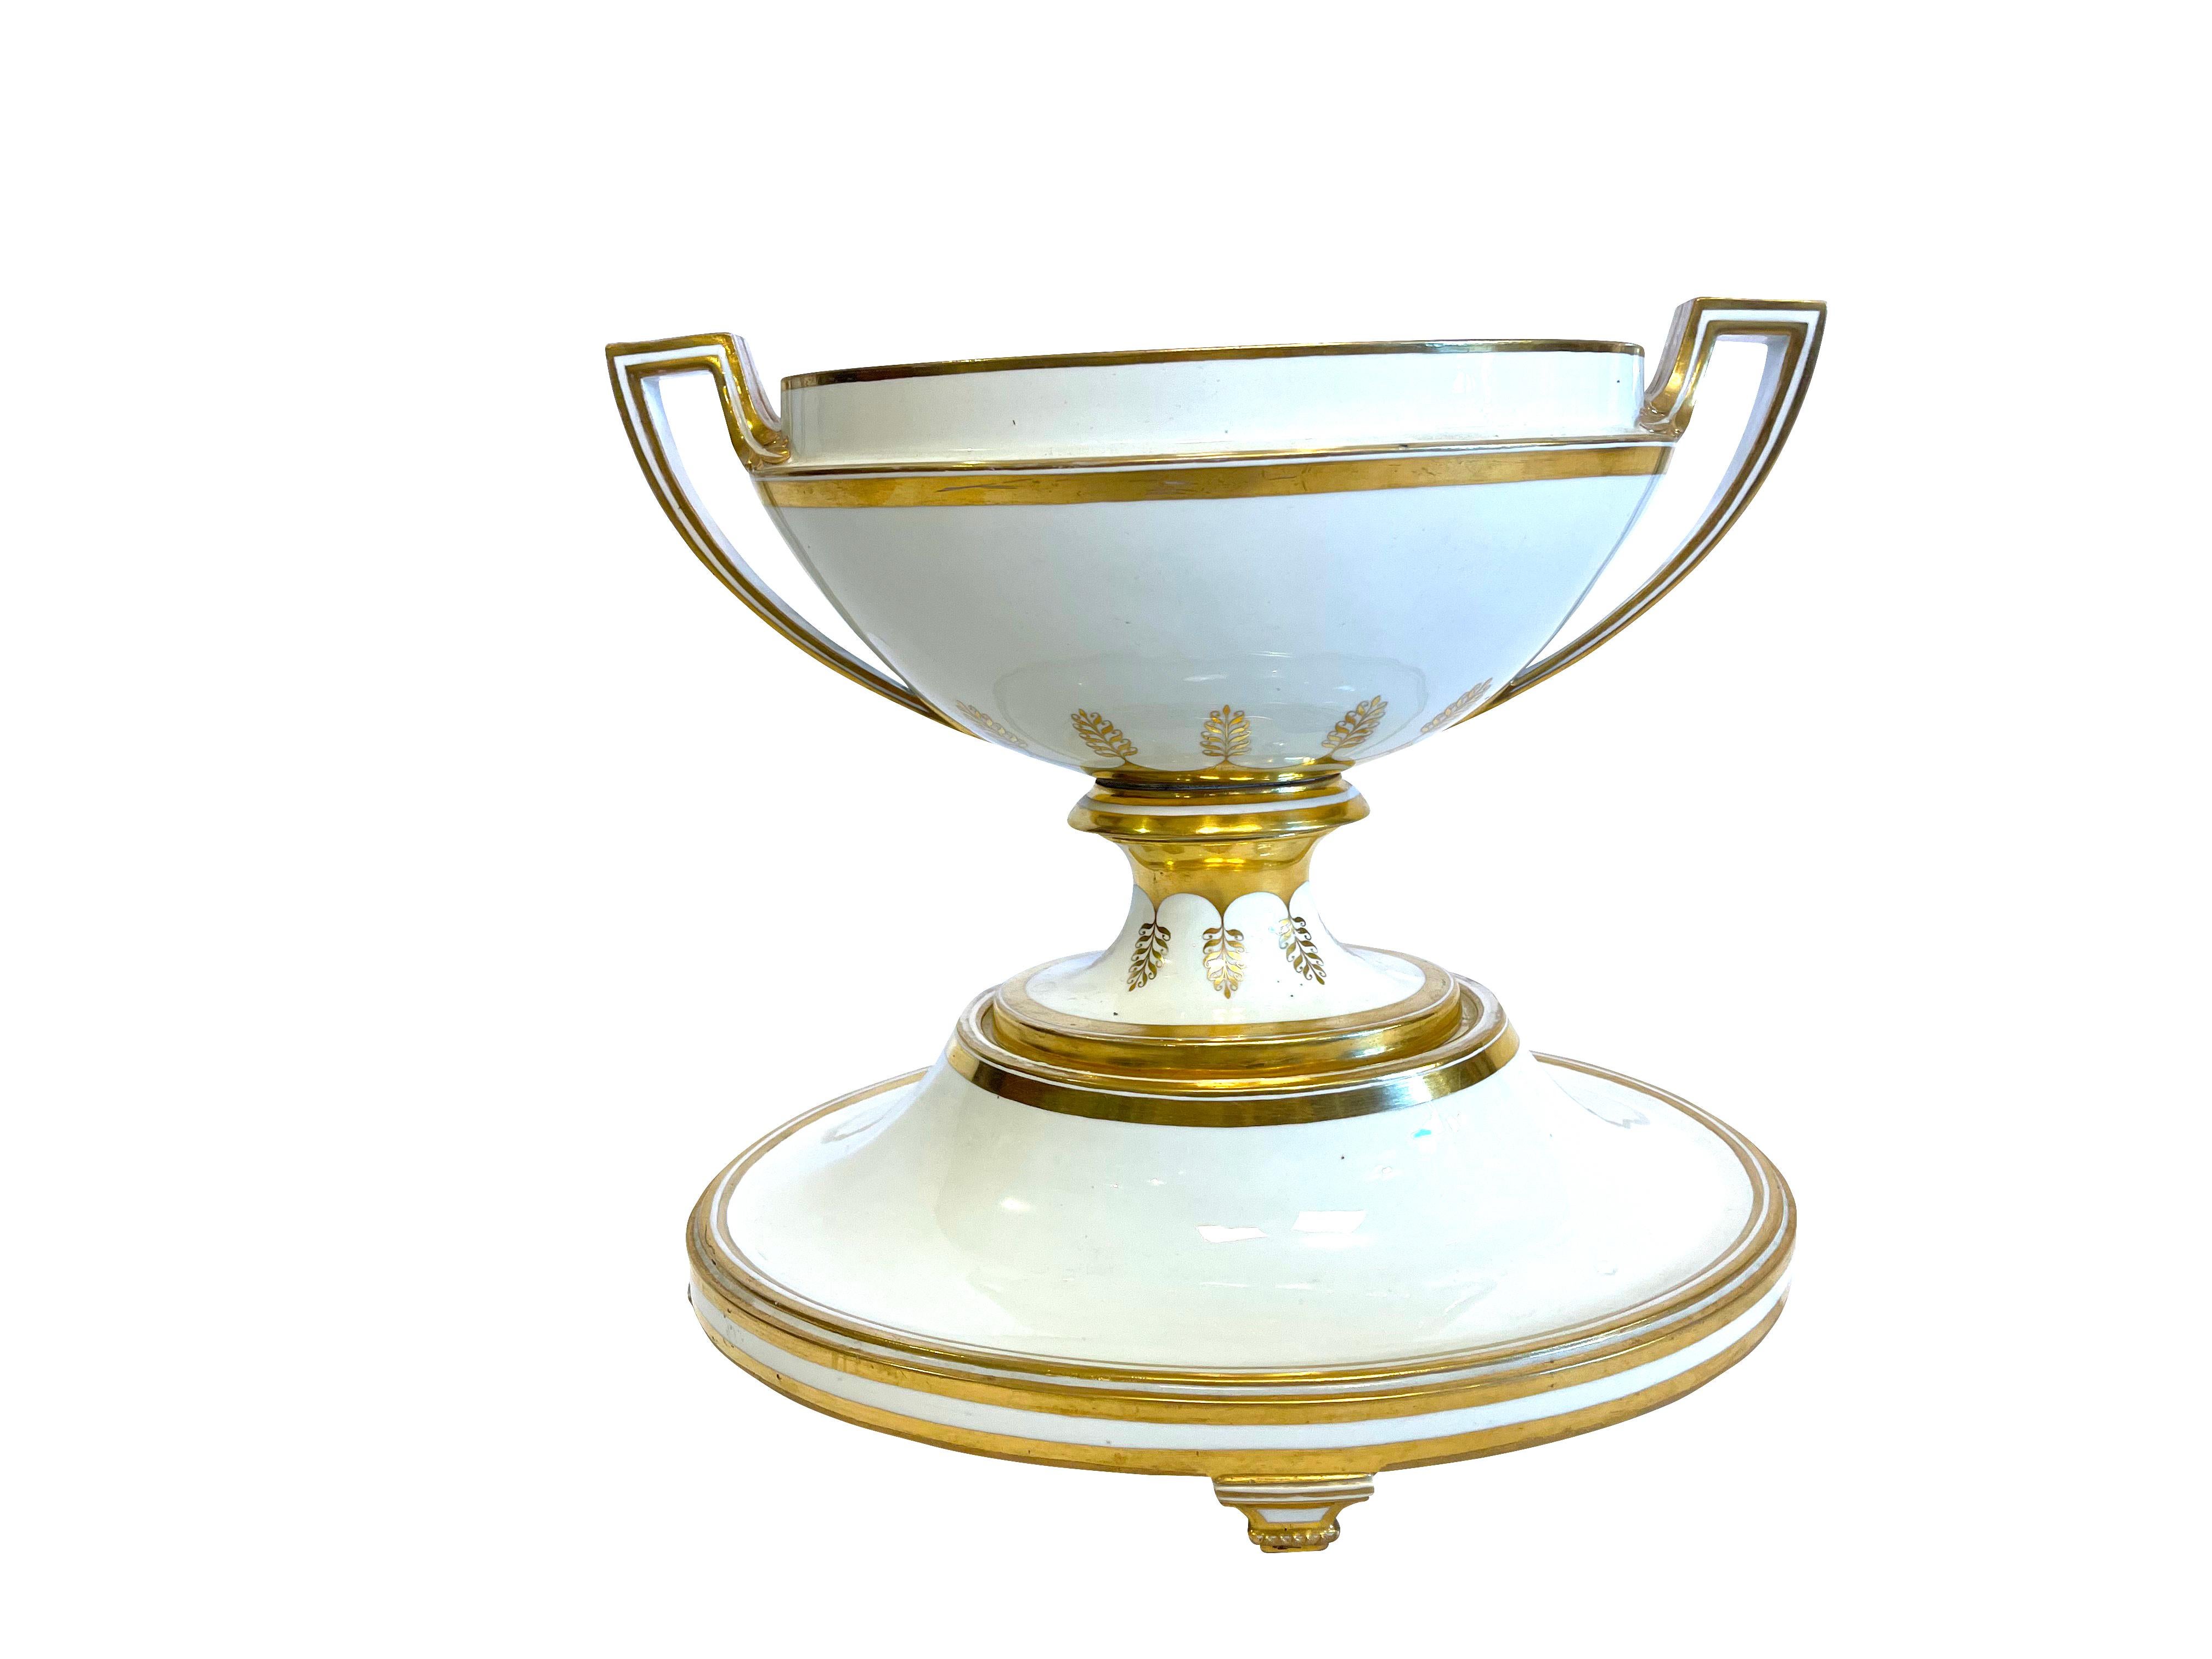 Stunning Antique KPM Royal Berlin porcelain neoclassical white and gilt centerpiece bowl on stand. Perfect for fruit display as a lovely planter or centerpiece on your dining table or sideboard. The base is separate from the elegant bowl, The bowl